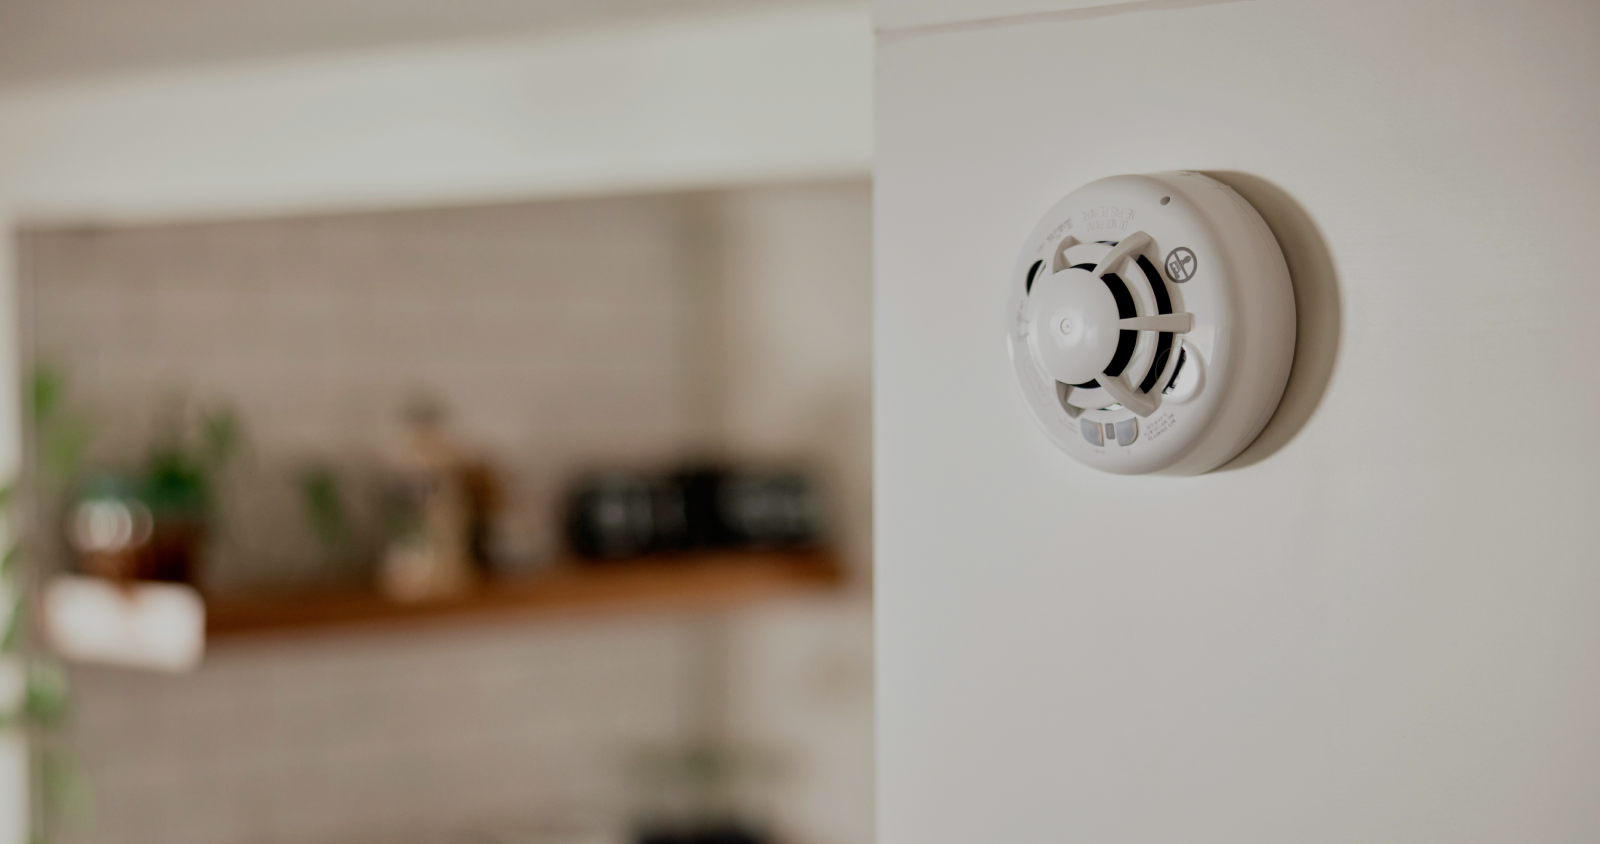 Vivint Combination Smoke and Carbon Monoxide detector installed on wall with a blurry background of the kitchen